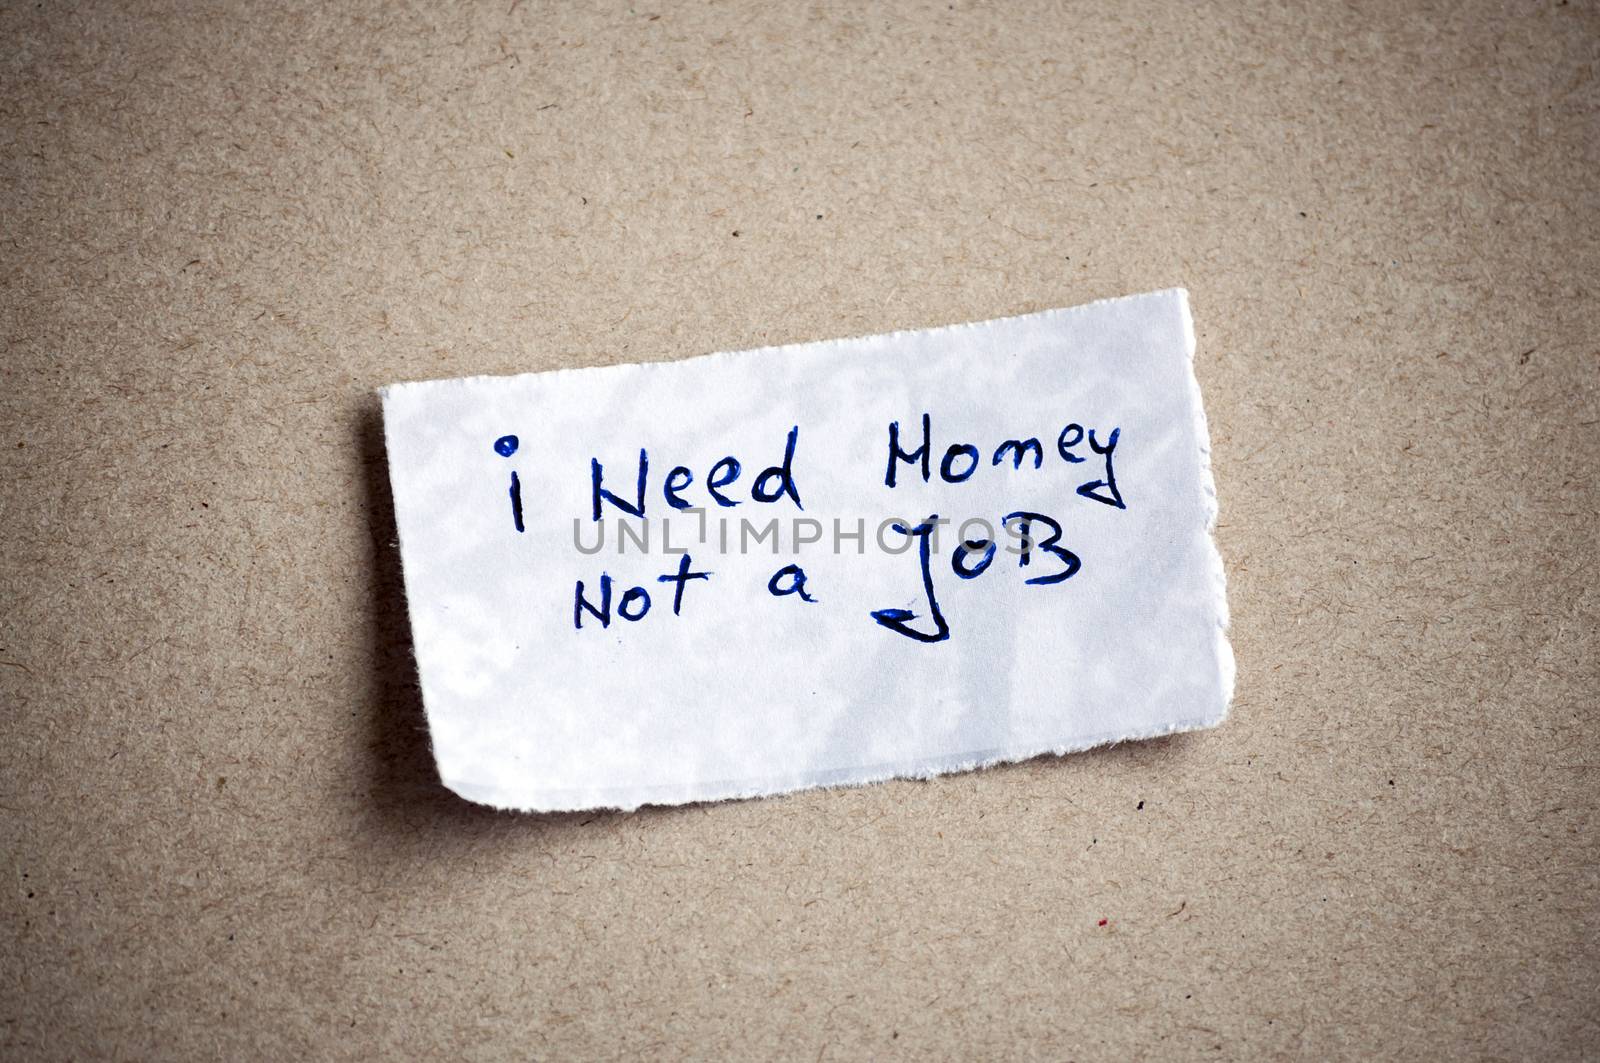 I need money, not a job message,written on piece of paper, on cardboard background. Space for your text.